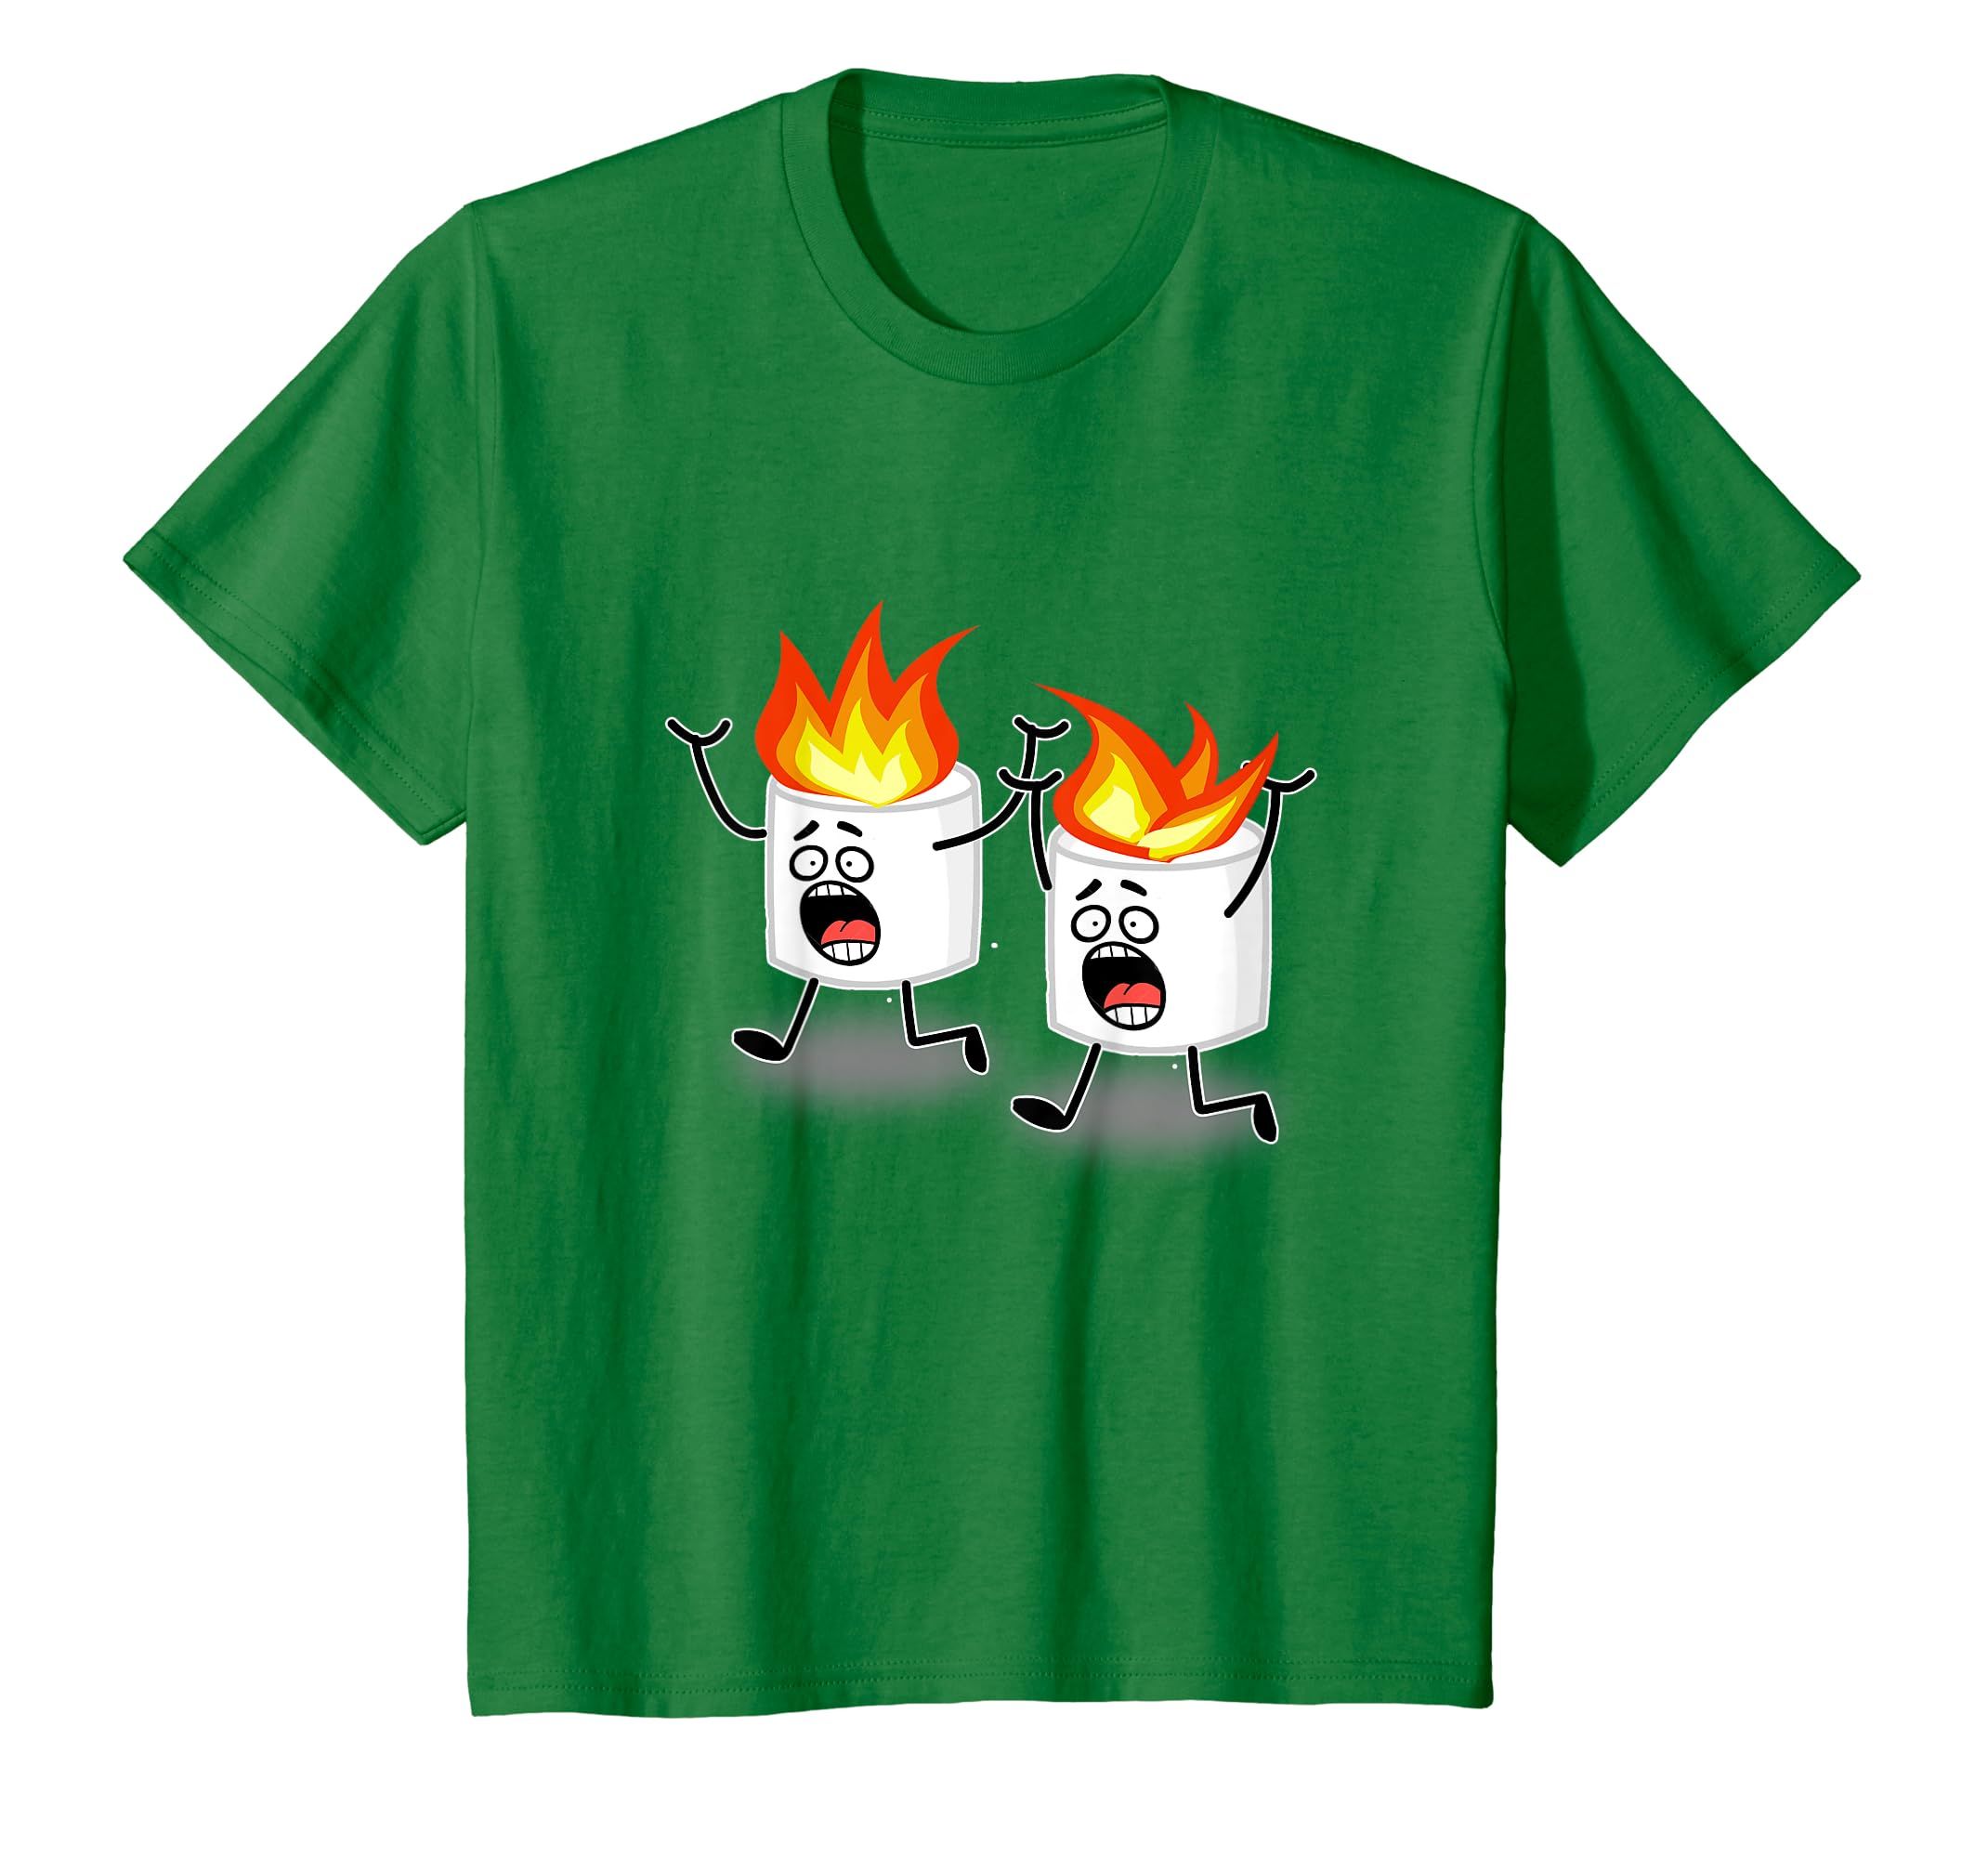 Children's Camp Camping Funny T-shirt Boys Kids Tees | Amazon (US)